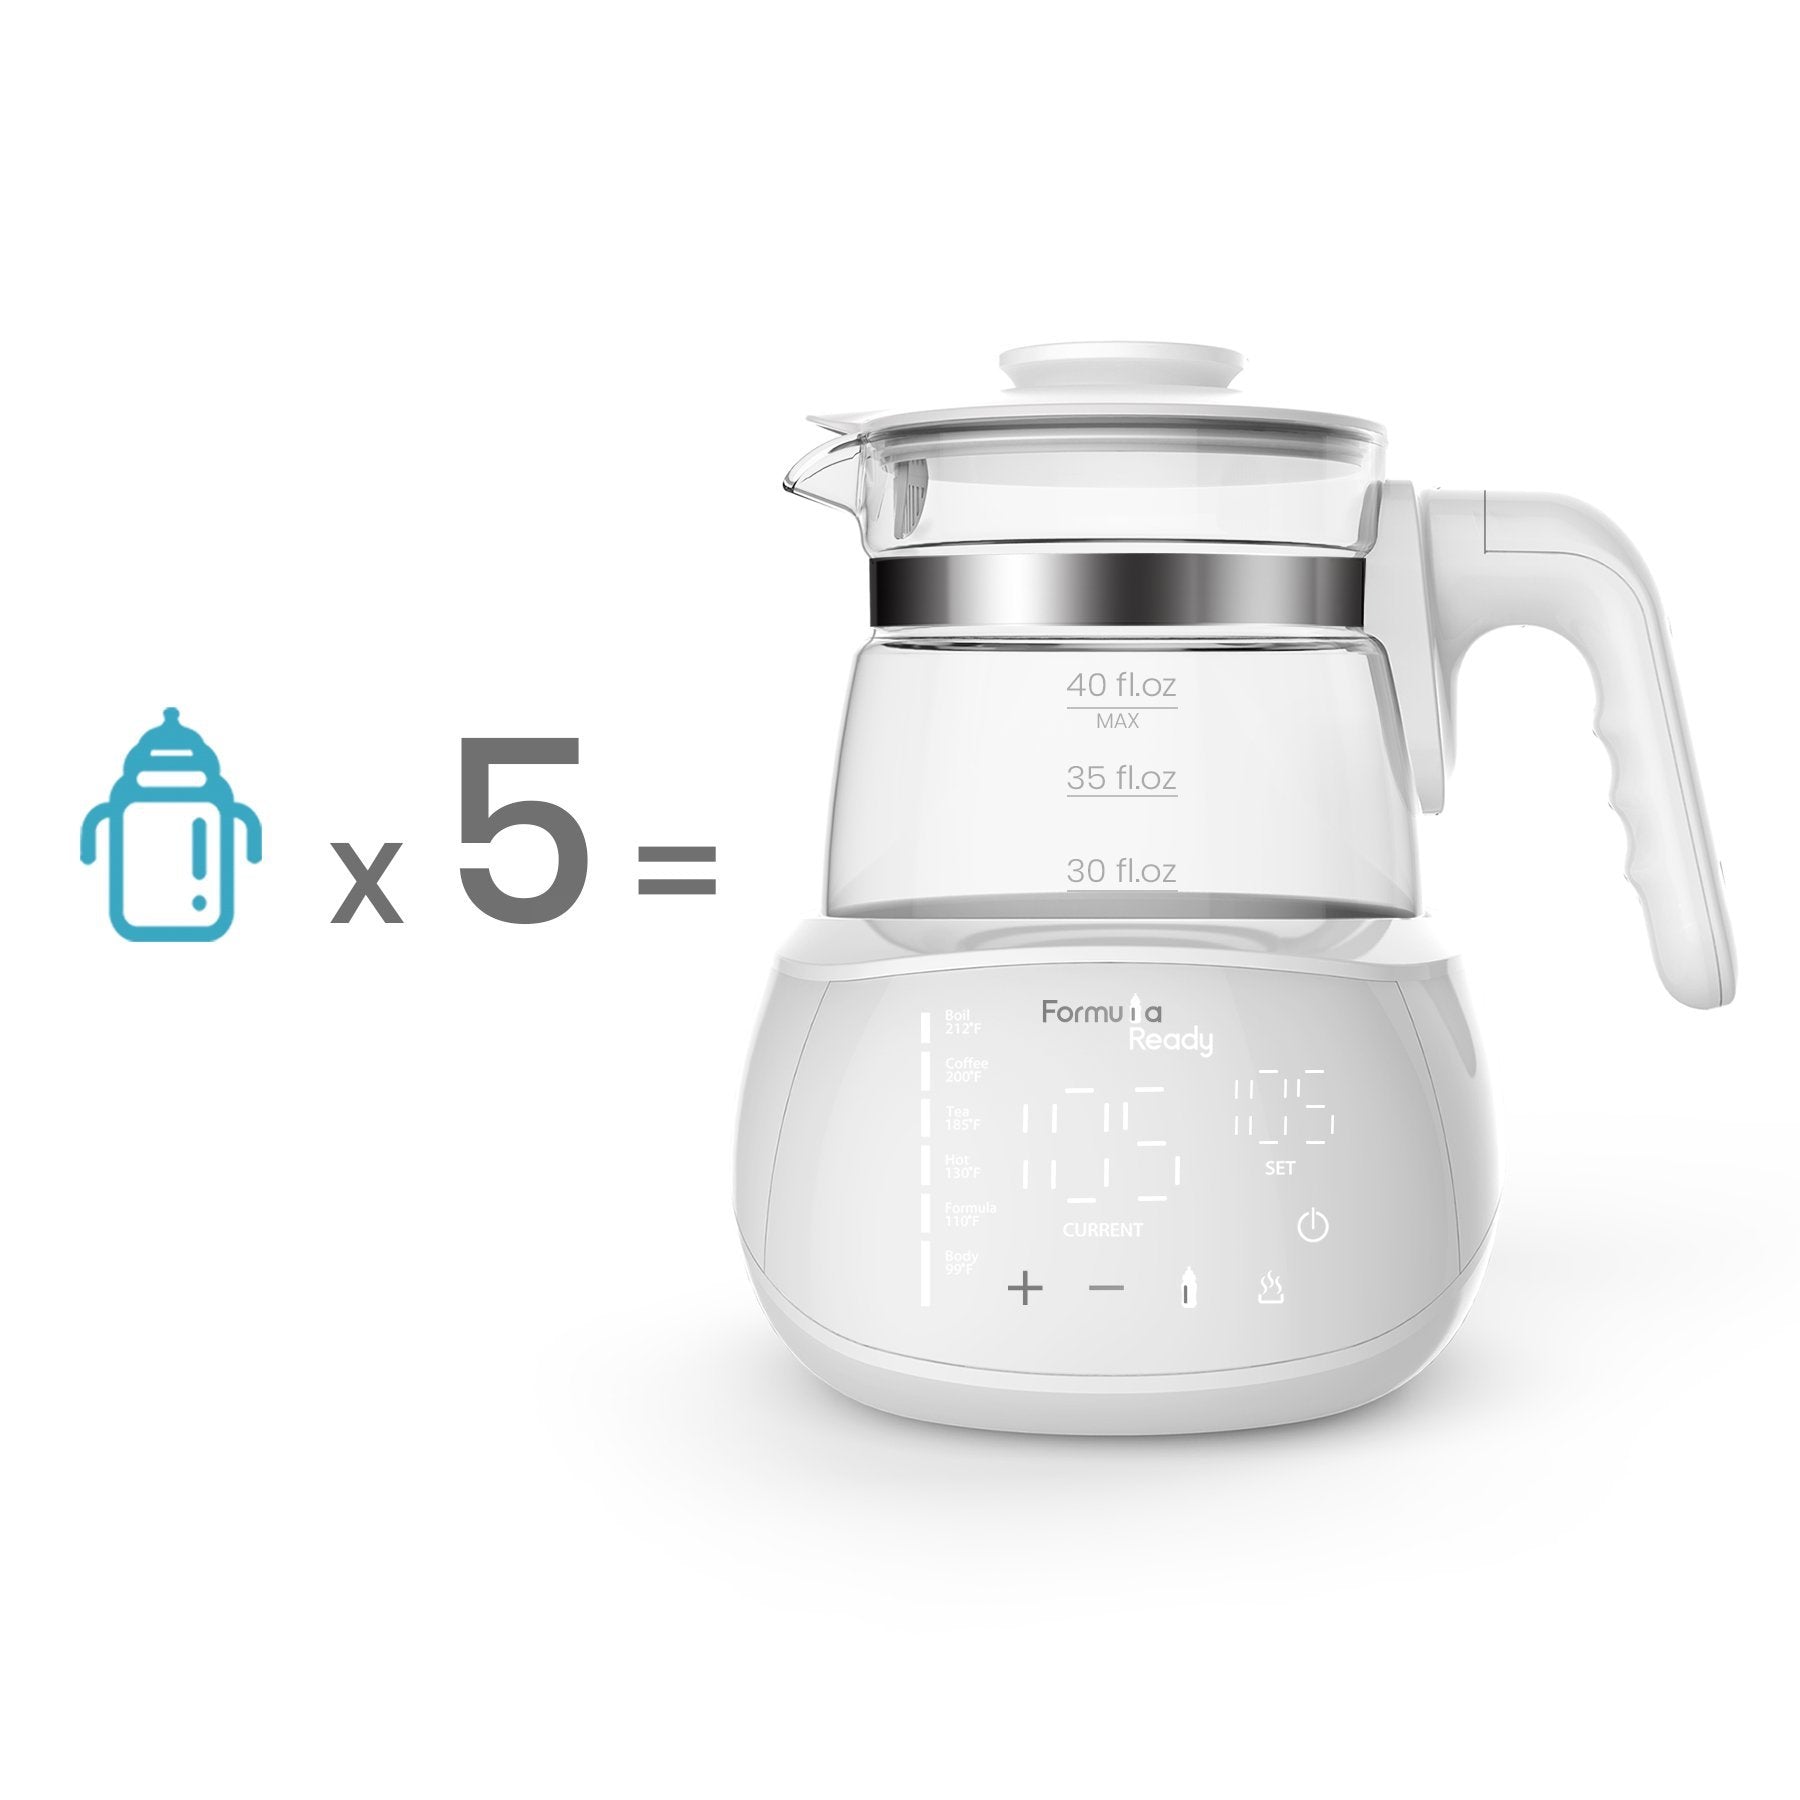 Baby Kettle  Heat Baby Formula Safely In Minutes – babykettle